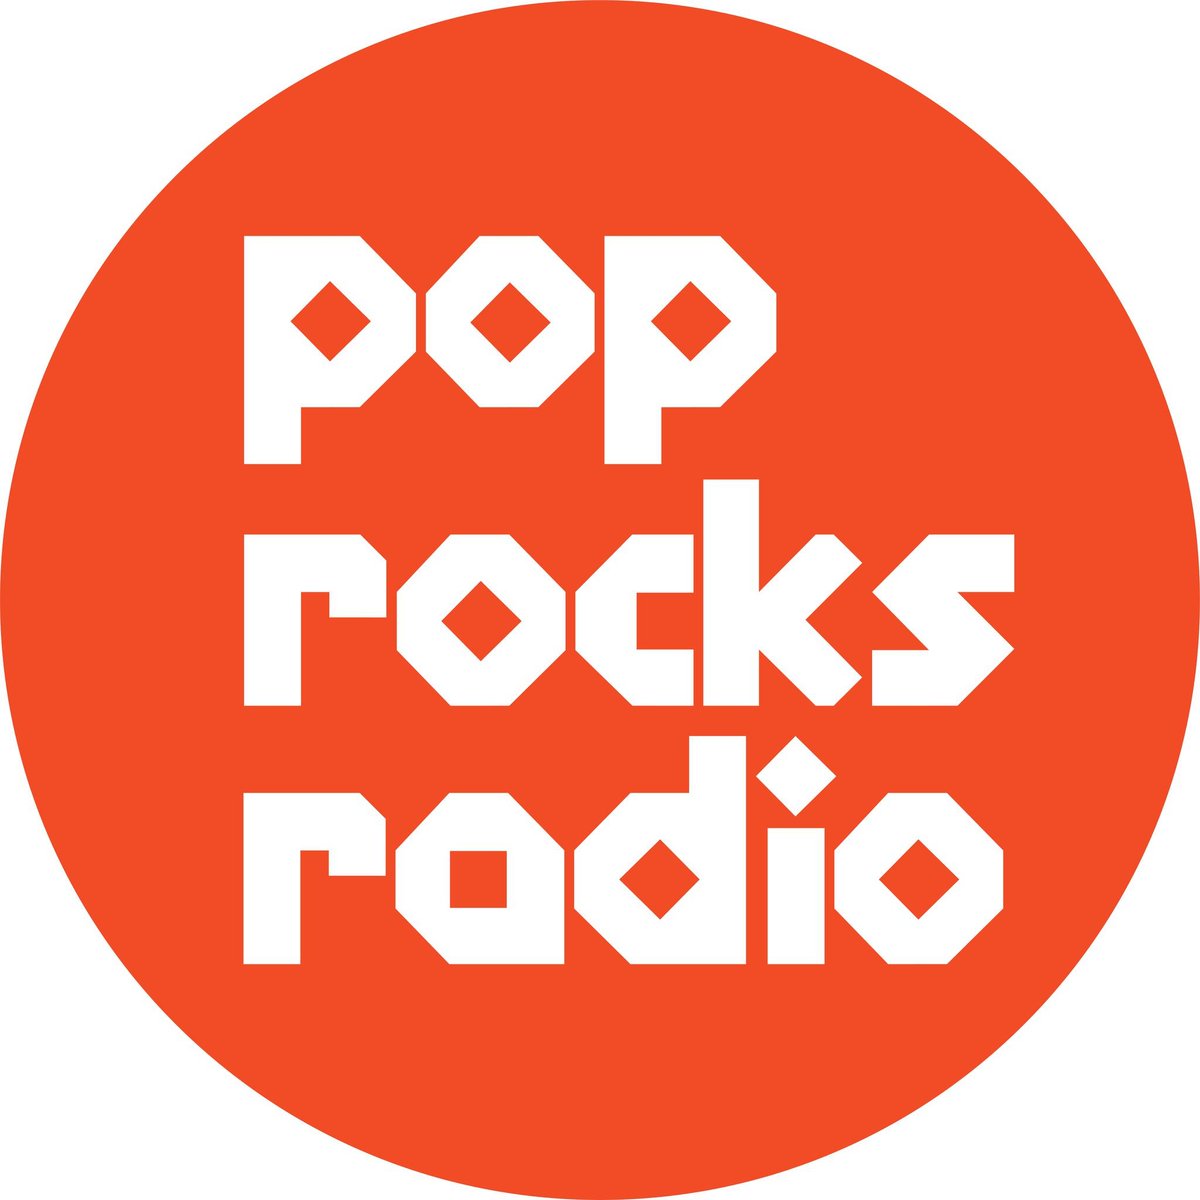 Thanks to Poprocksradio (USA) Rock Never Rusts (Boston)
Boston Tackle Box (Boston) for adding @TheAmplifierHeads @BarrenceWhitfield
'They Came To Rock' to your stations. @RumBarRecords